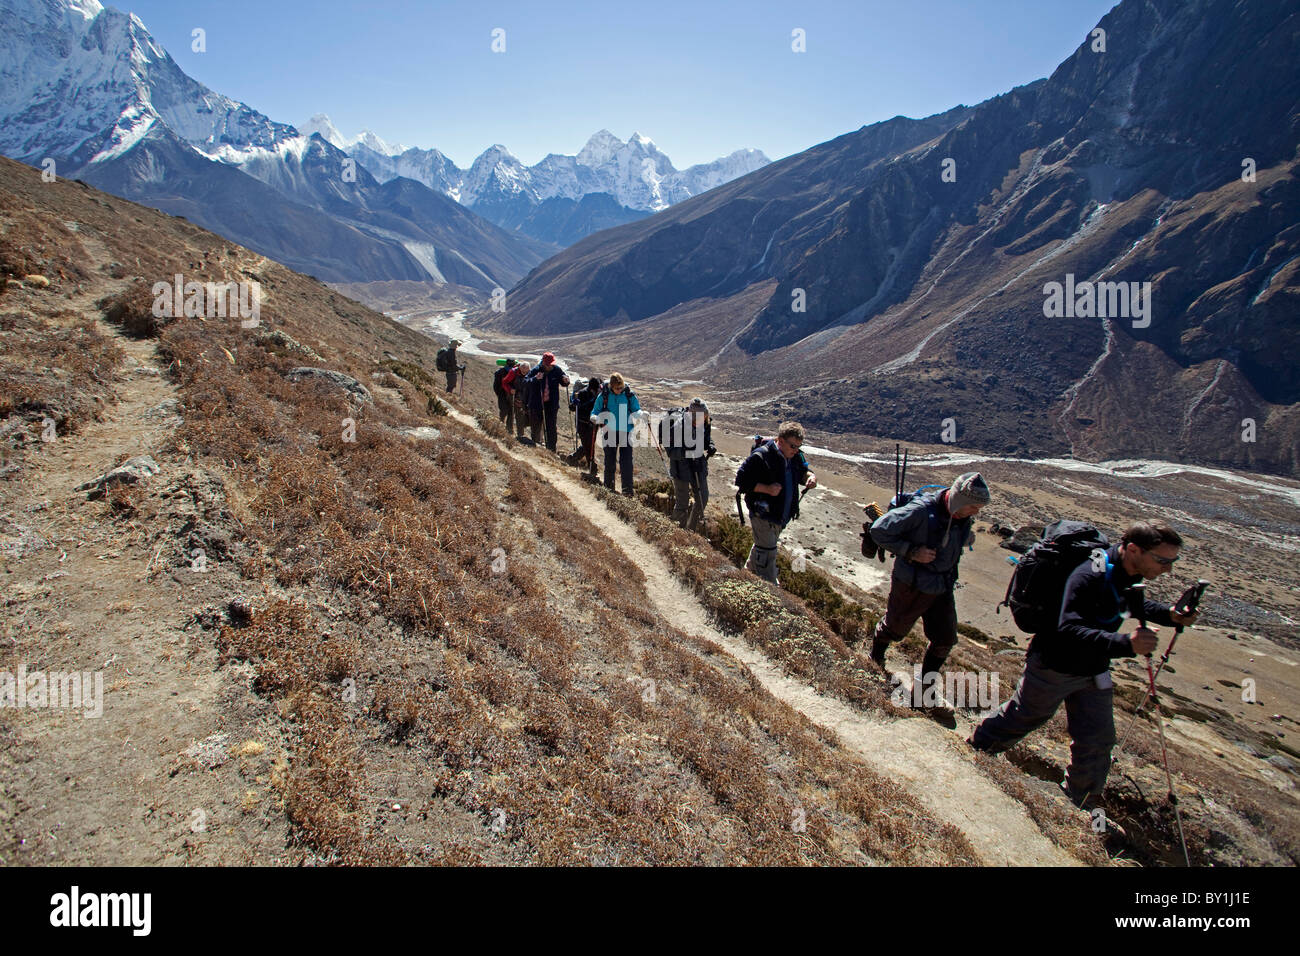 Nepal, Everest Region, Khumbu Valley.   Trekkers and Porters on the Everest Base Camp Trail alongside the Periche Valley Stock Photo